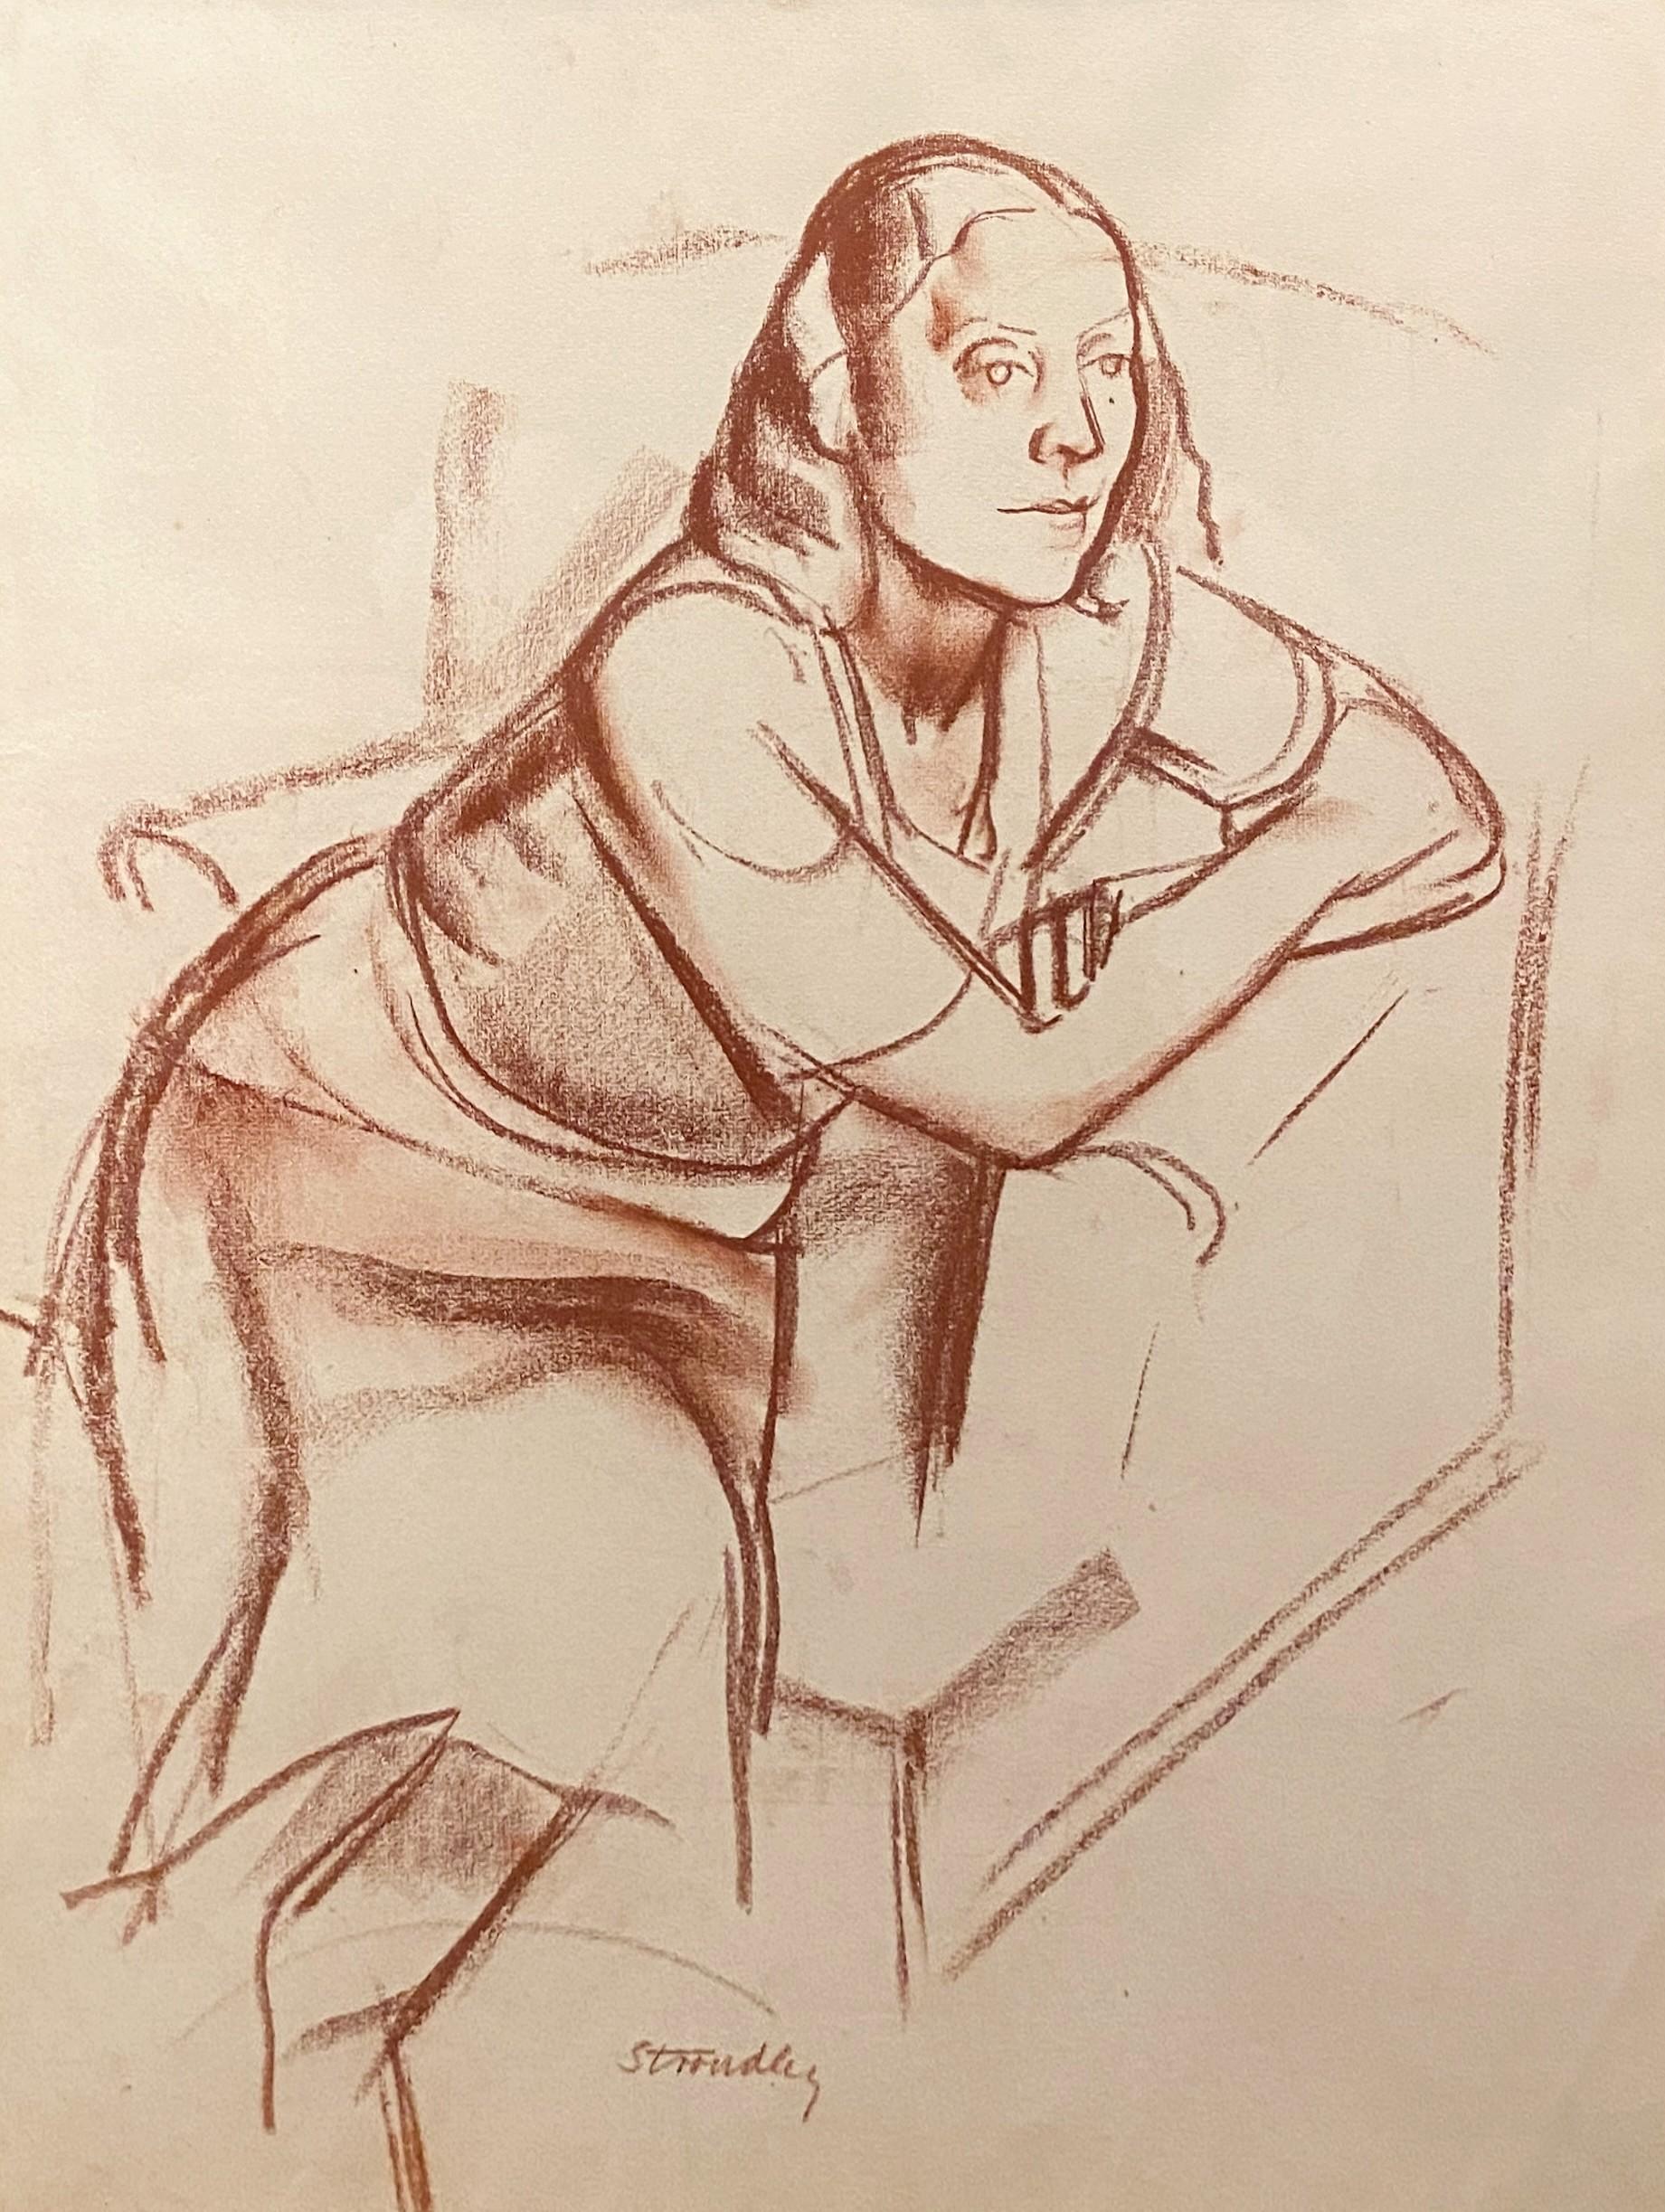 James Stroudley Figurative Art - Woman at Rest, Signed Charcoal Sketch, 20th Century British